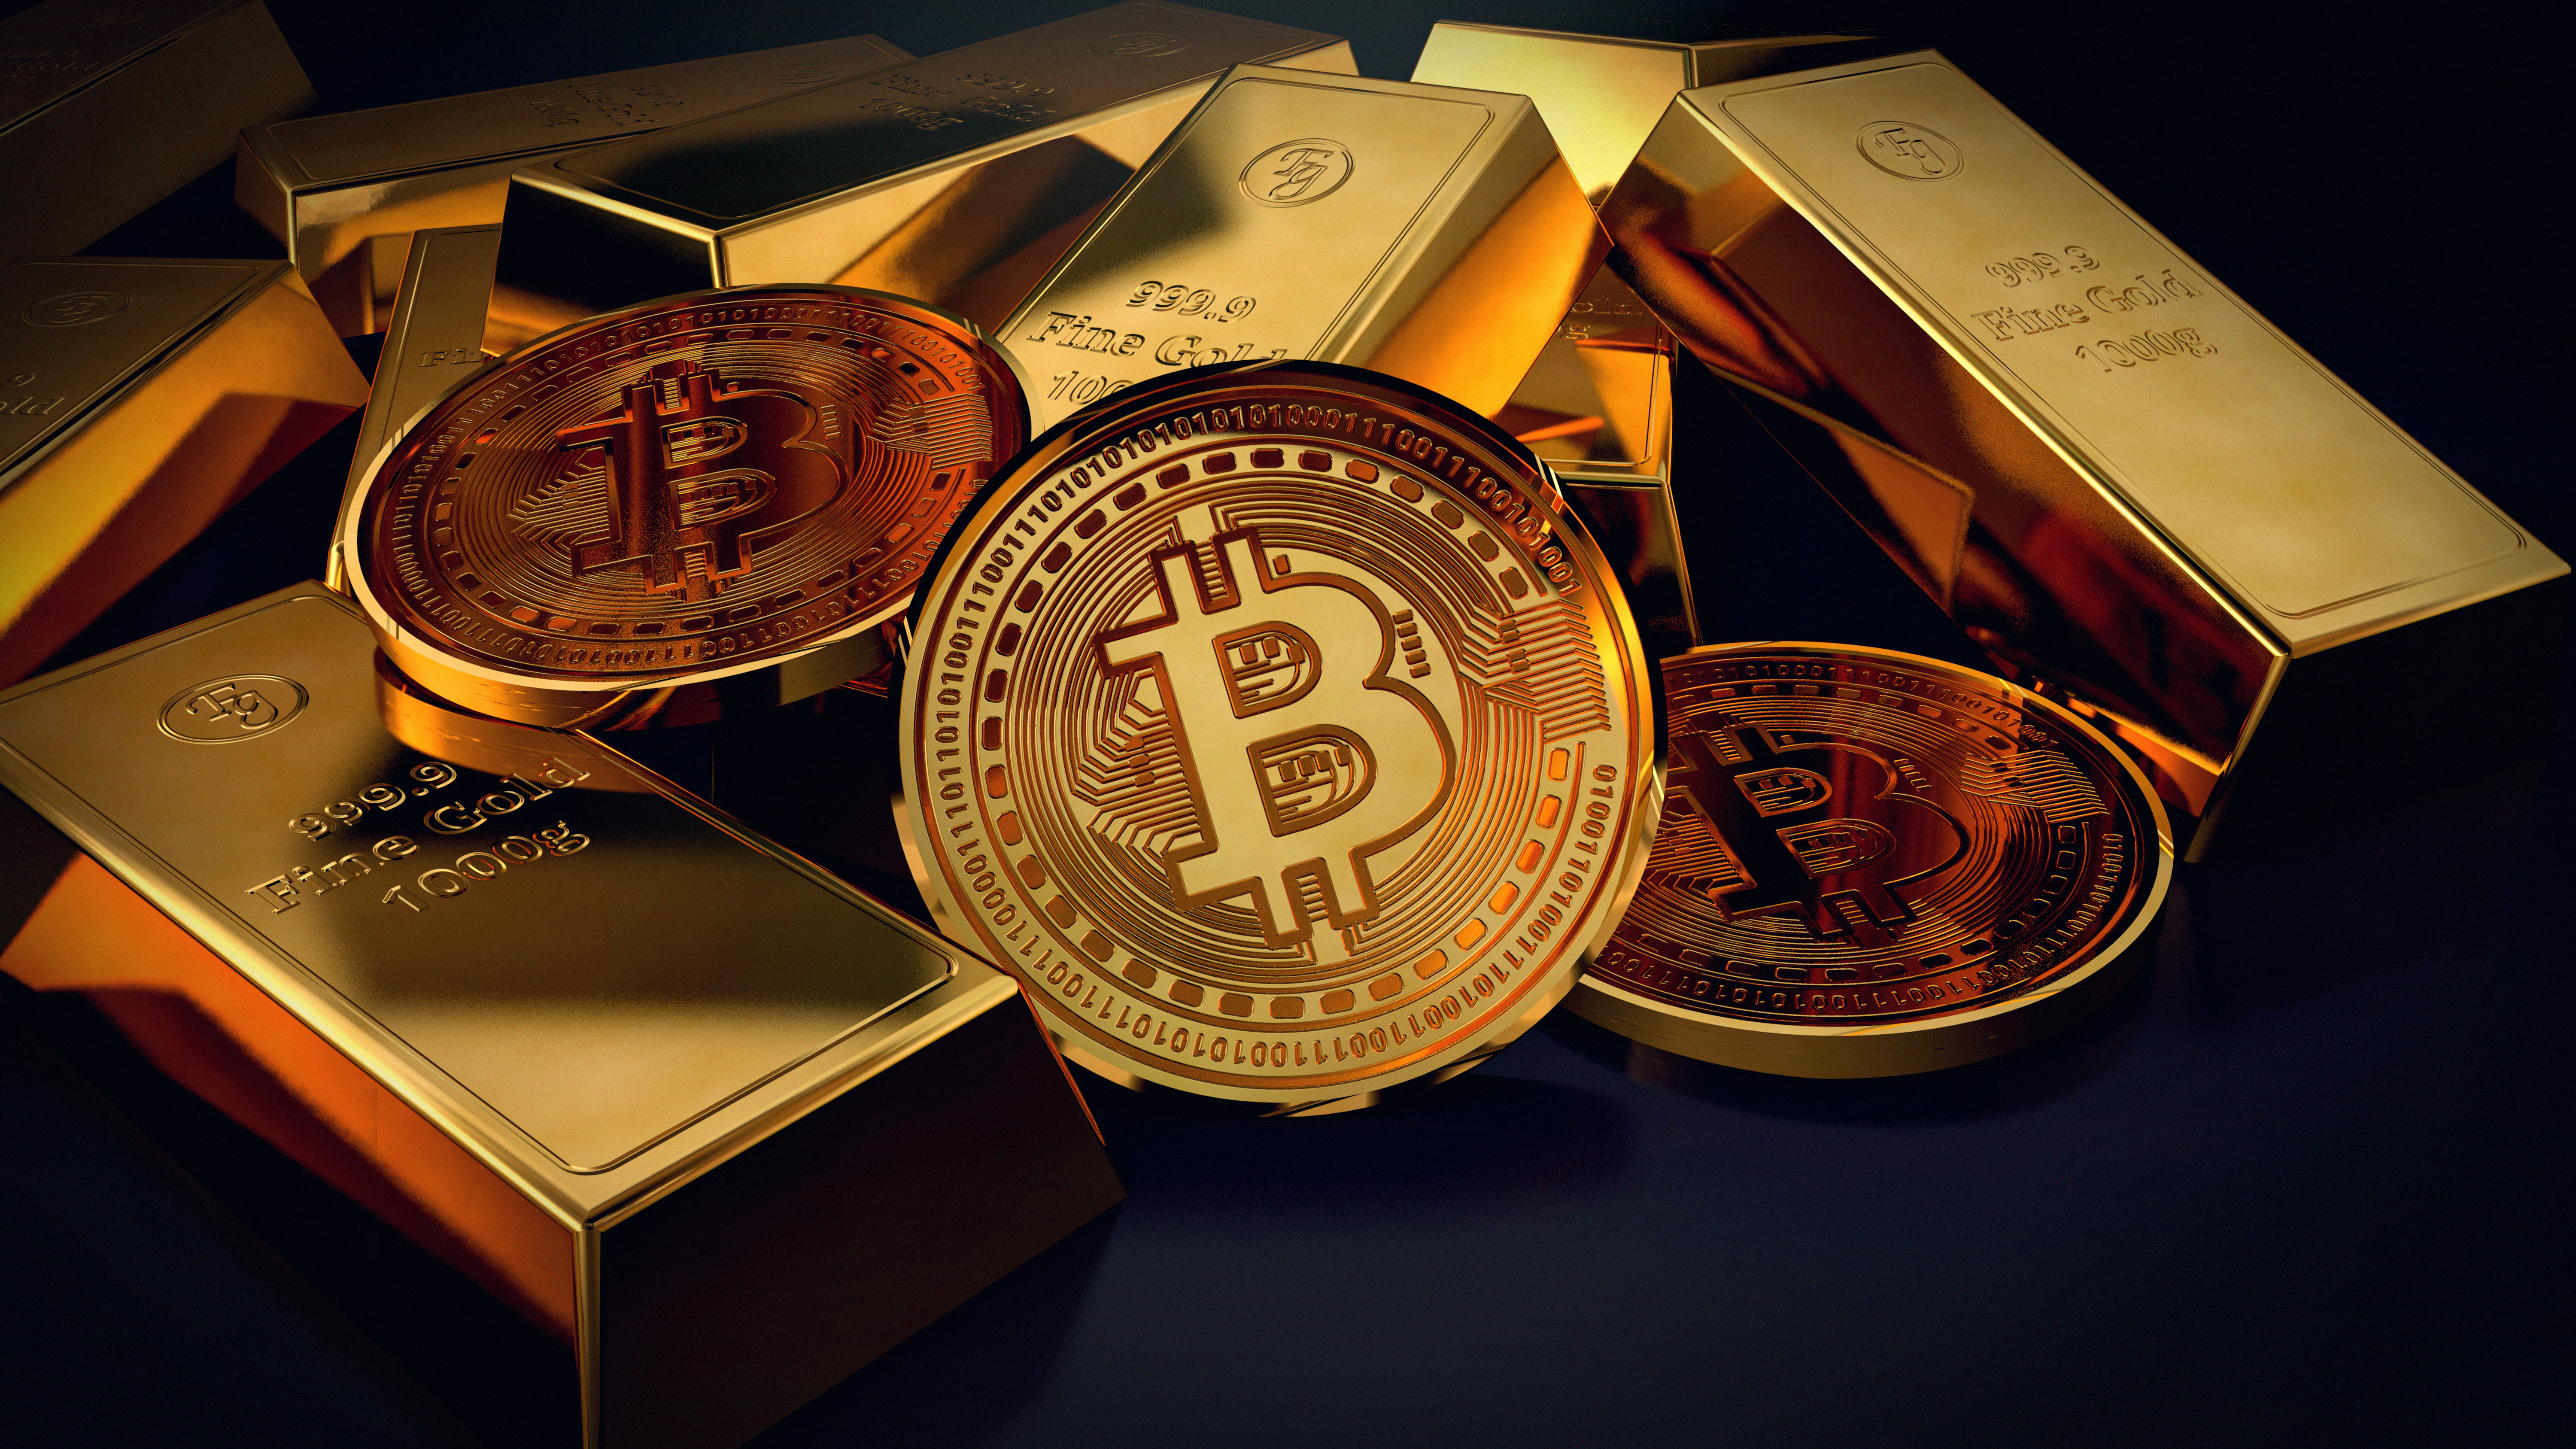 Several coins representing bitcoin tokens are stacked and mixed with gold bars.